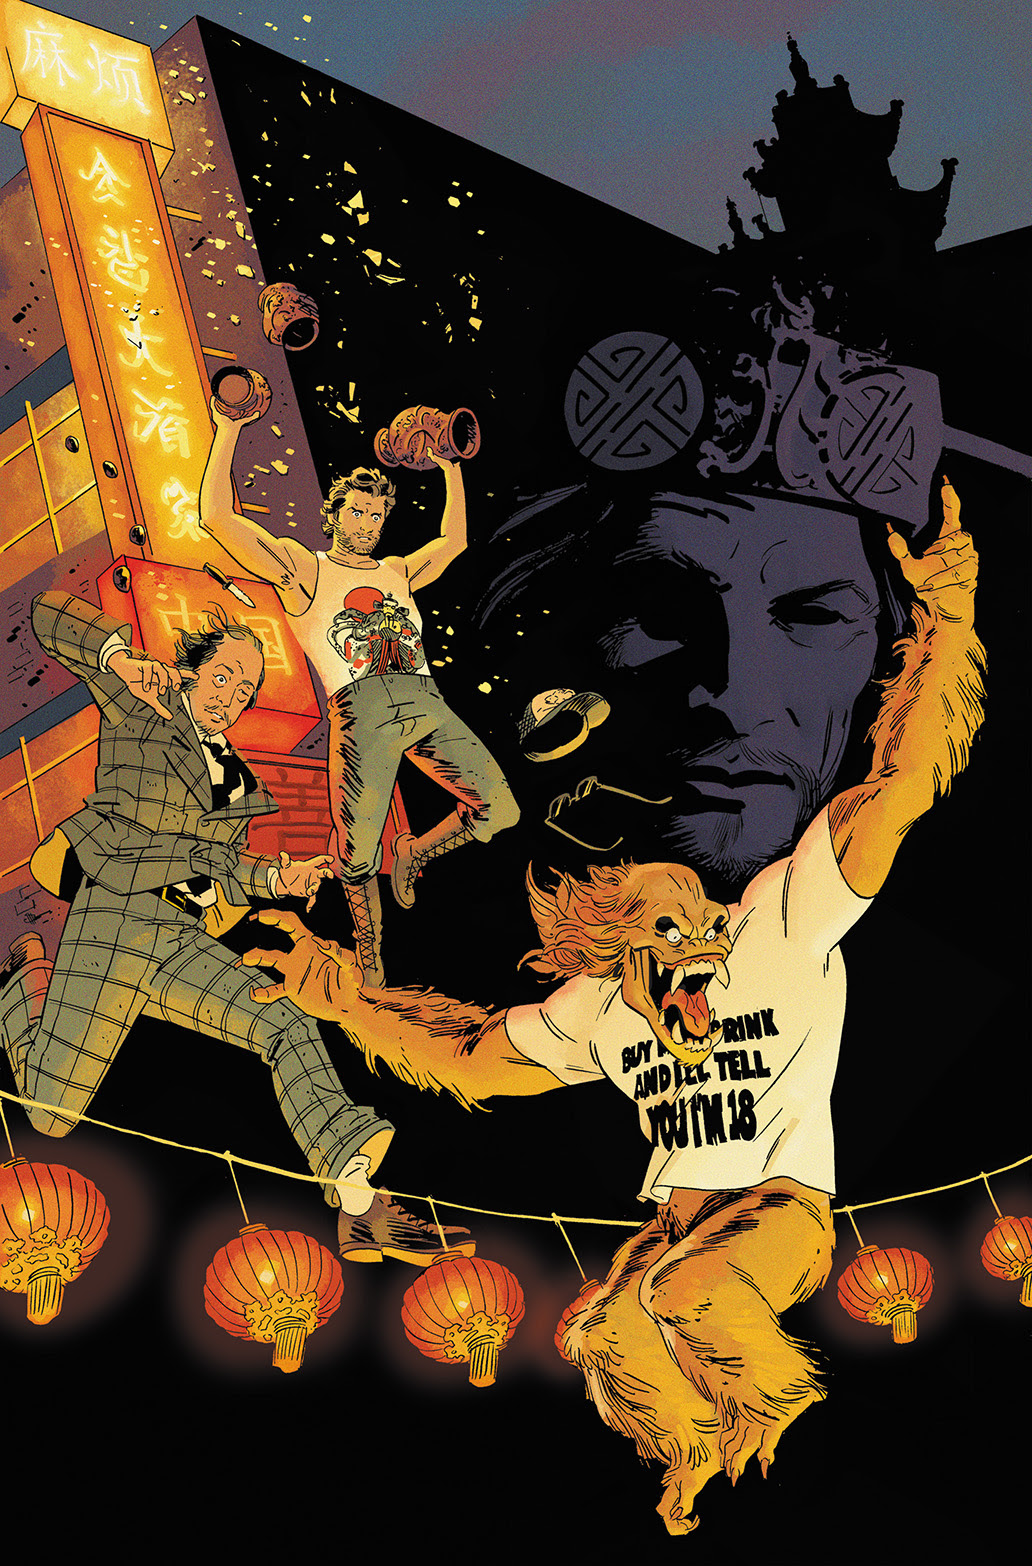 BIG TROUBLE IN LITTLE CHINA #4 Cover C by Evan Shaner